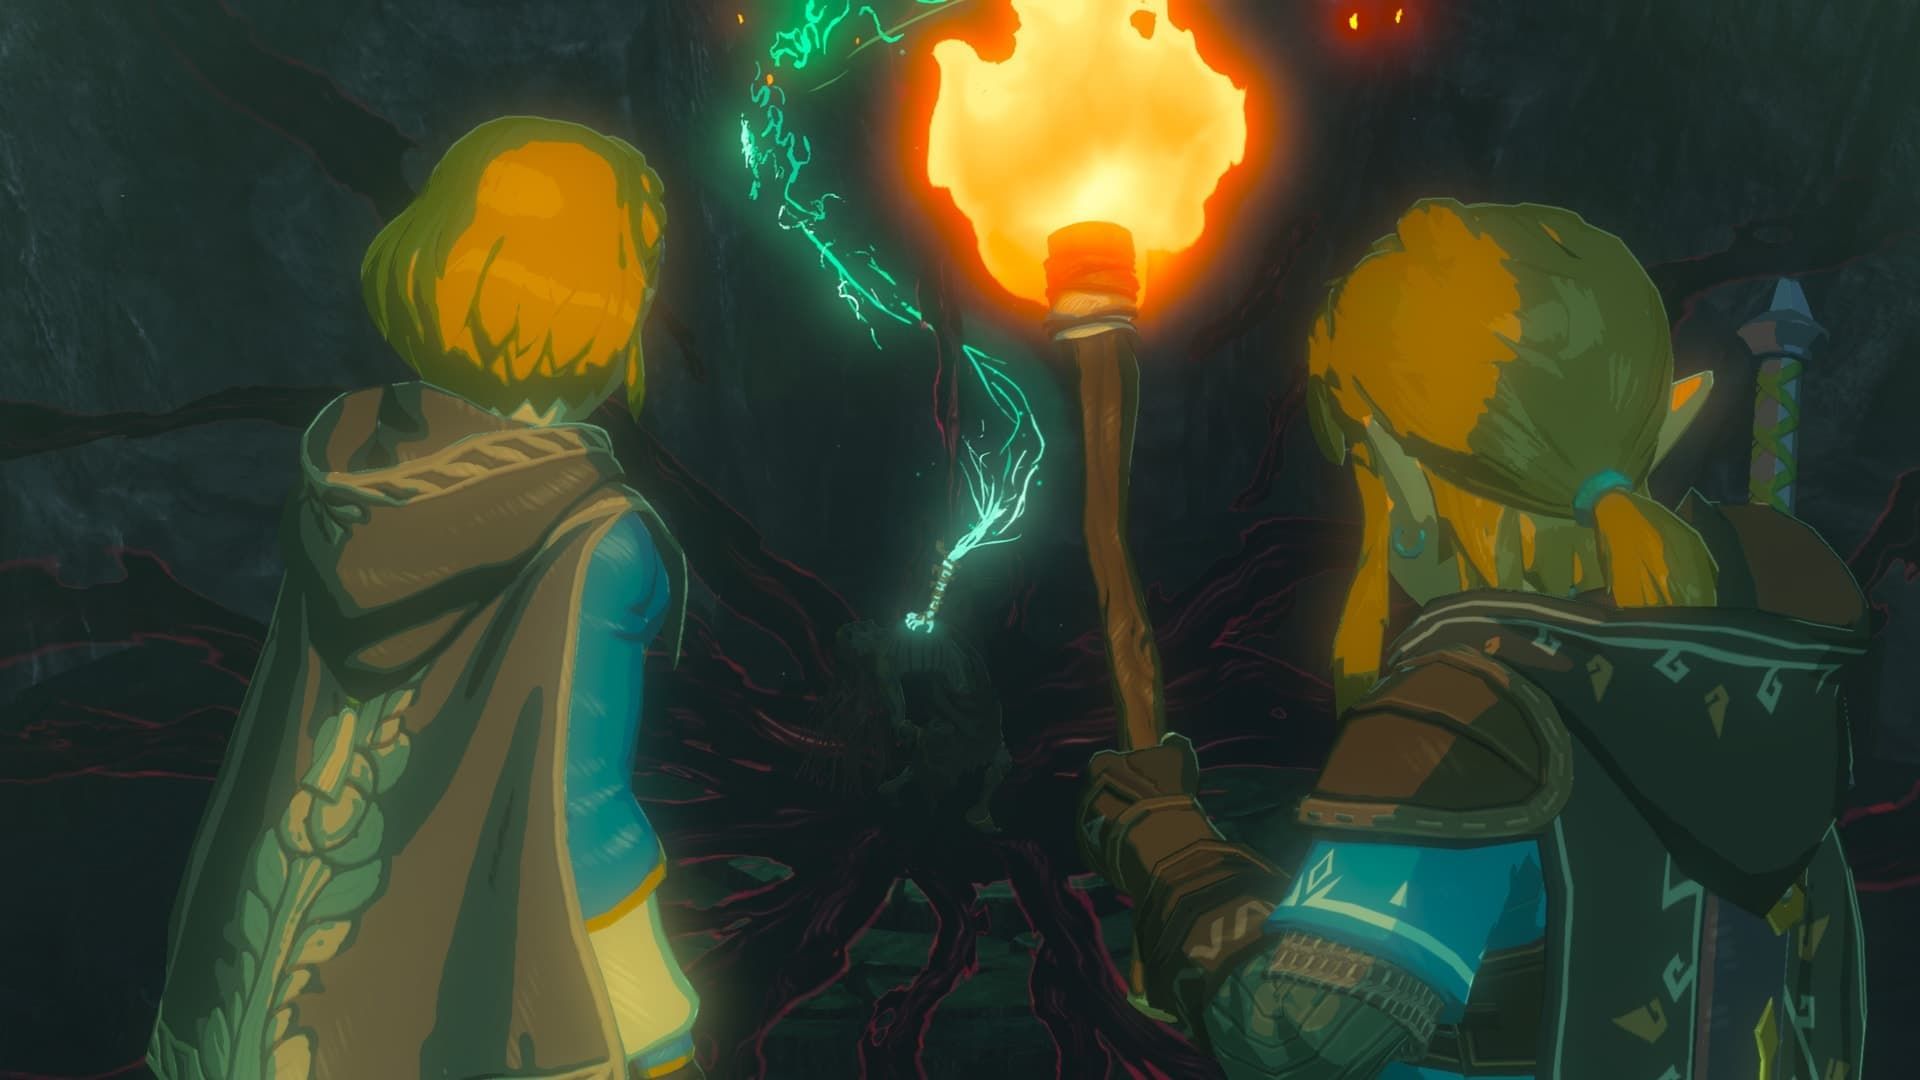 The Legend of Zelda: Breath of the Wild Sequel Rumored to be